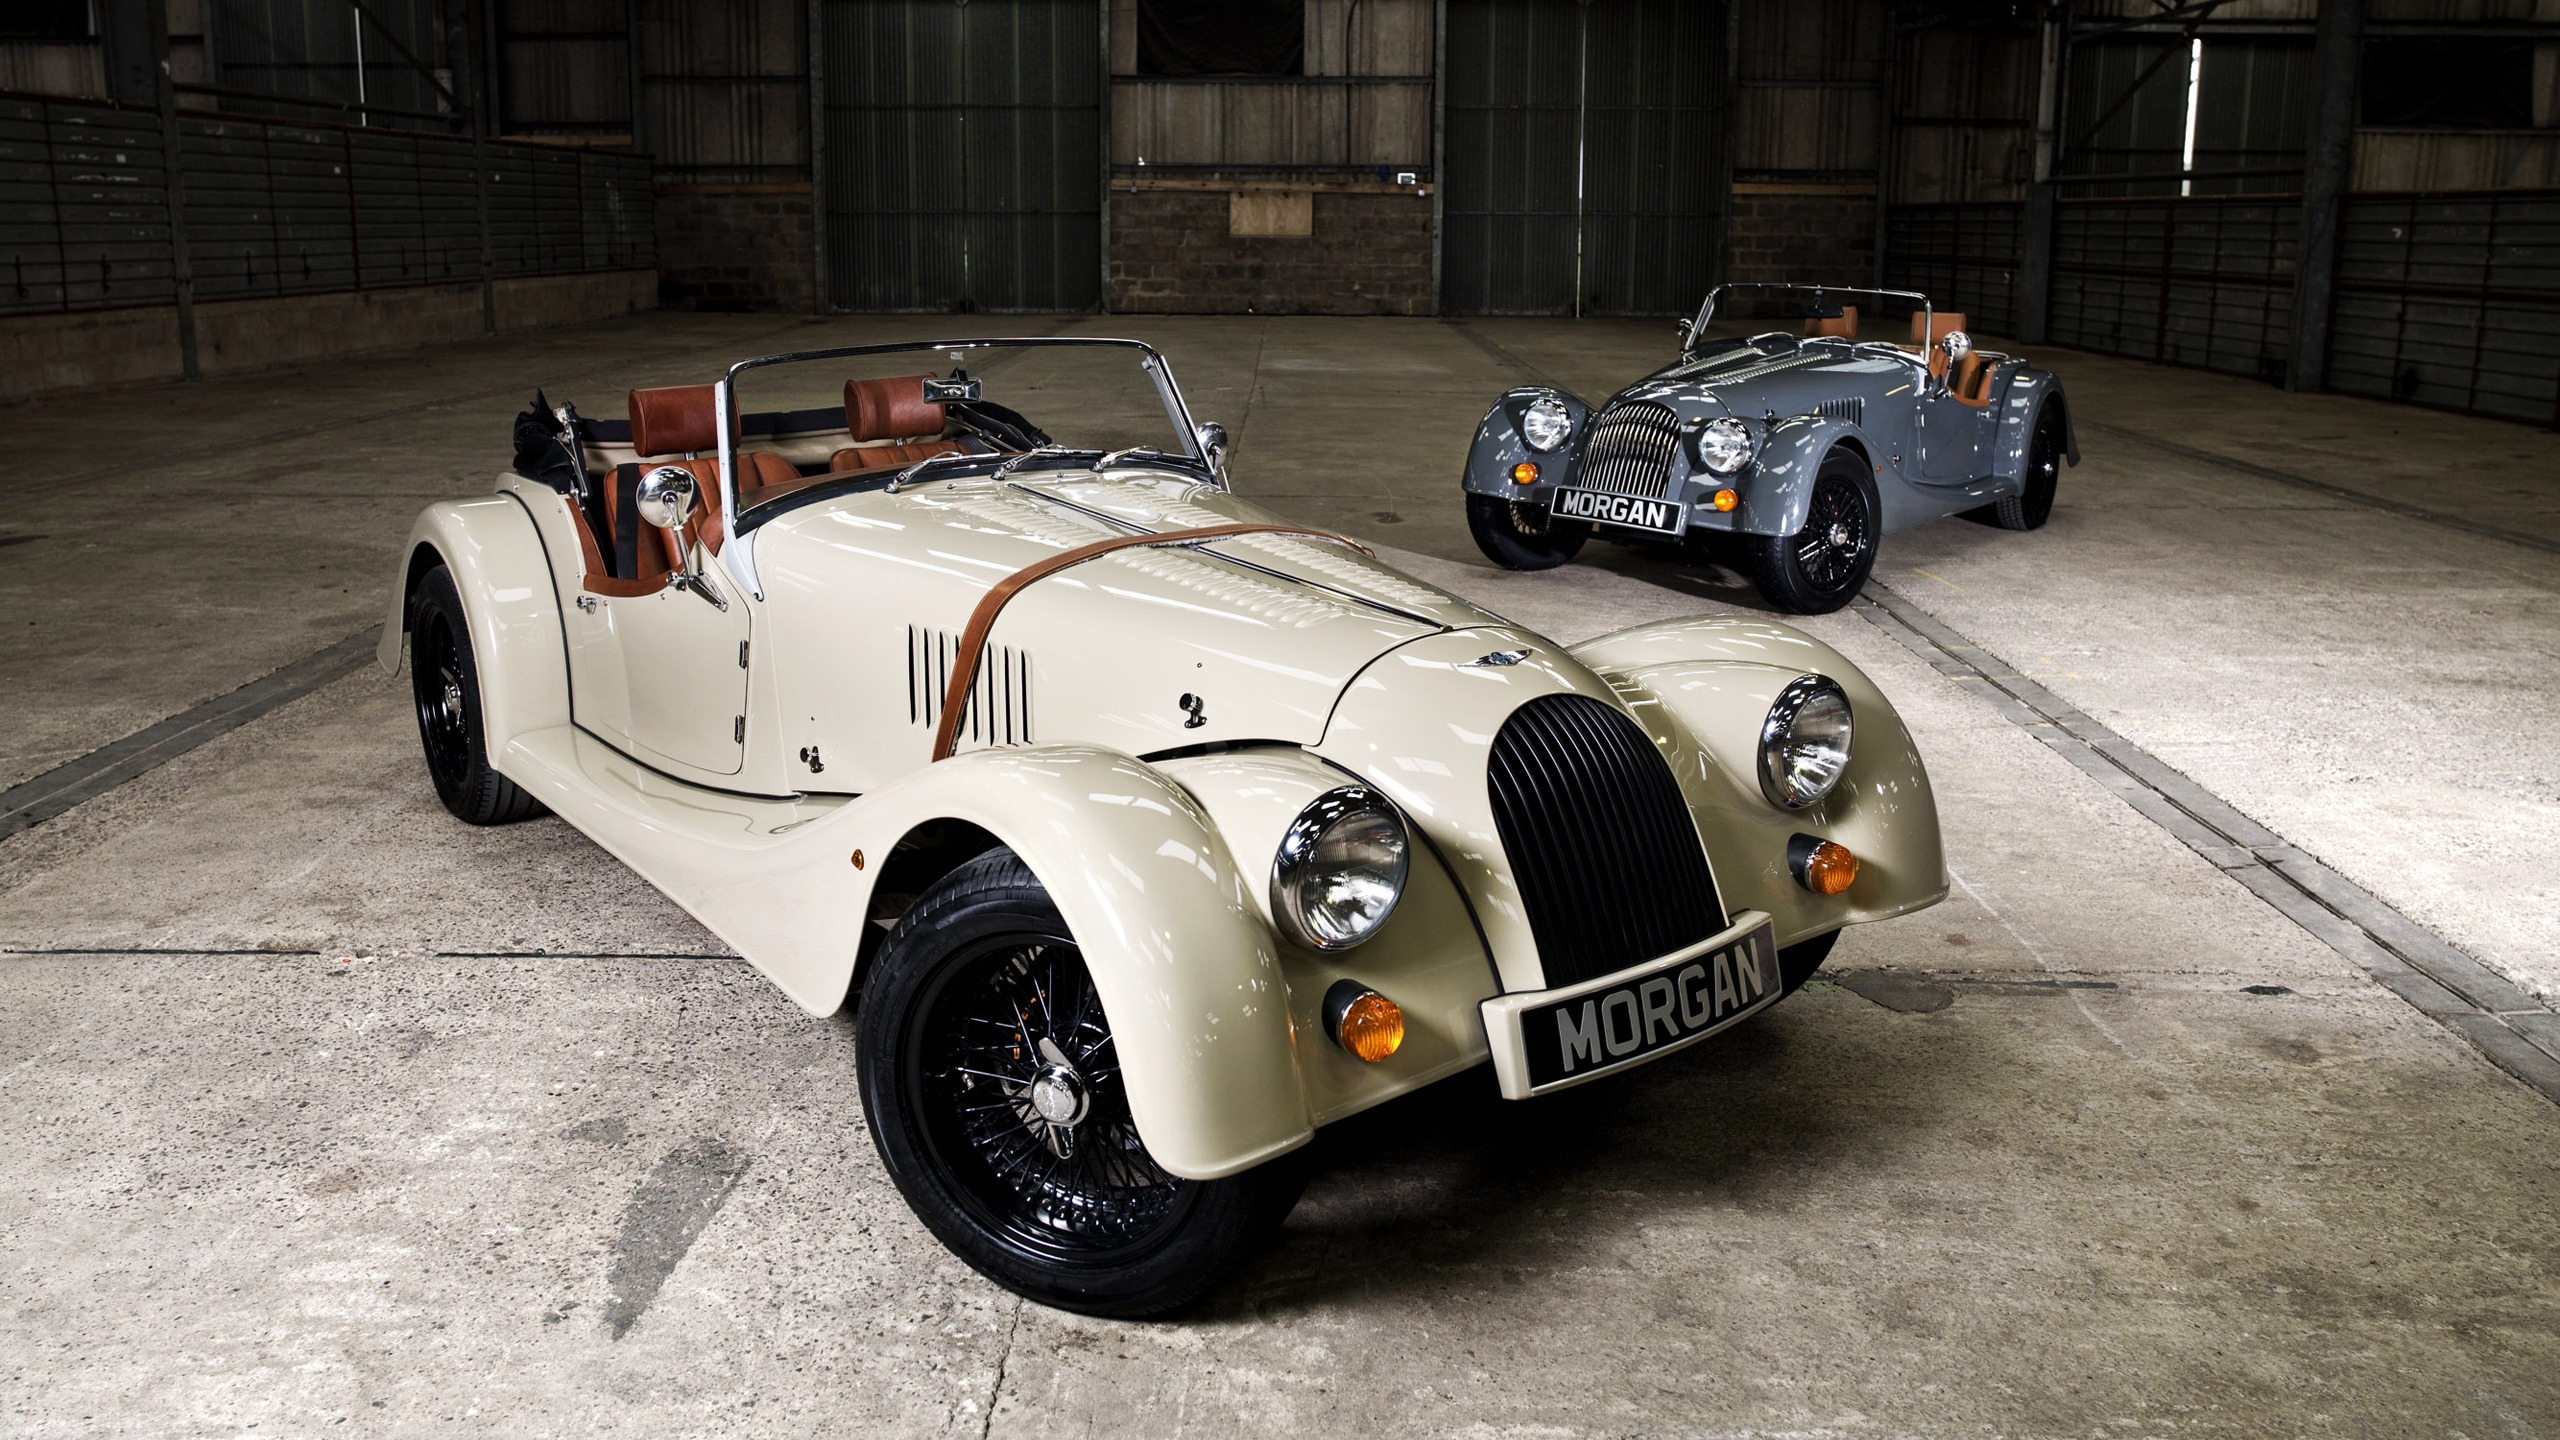 Two Morgan Roadster for 2560x1440 HDTV resolution